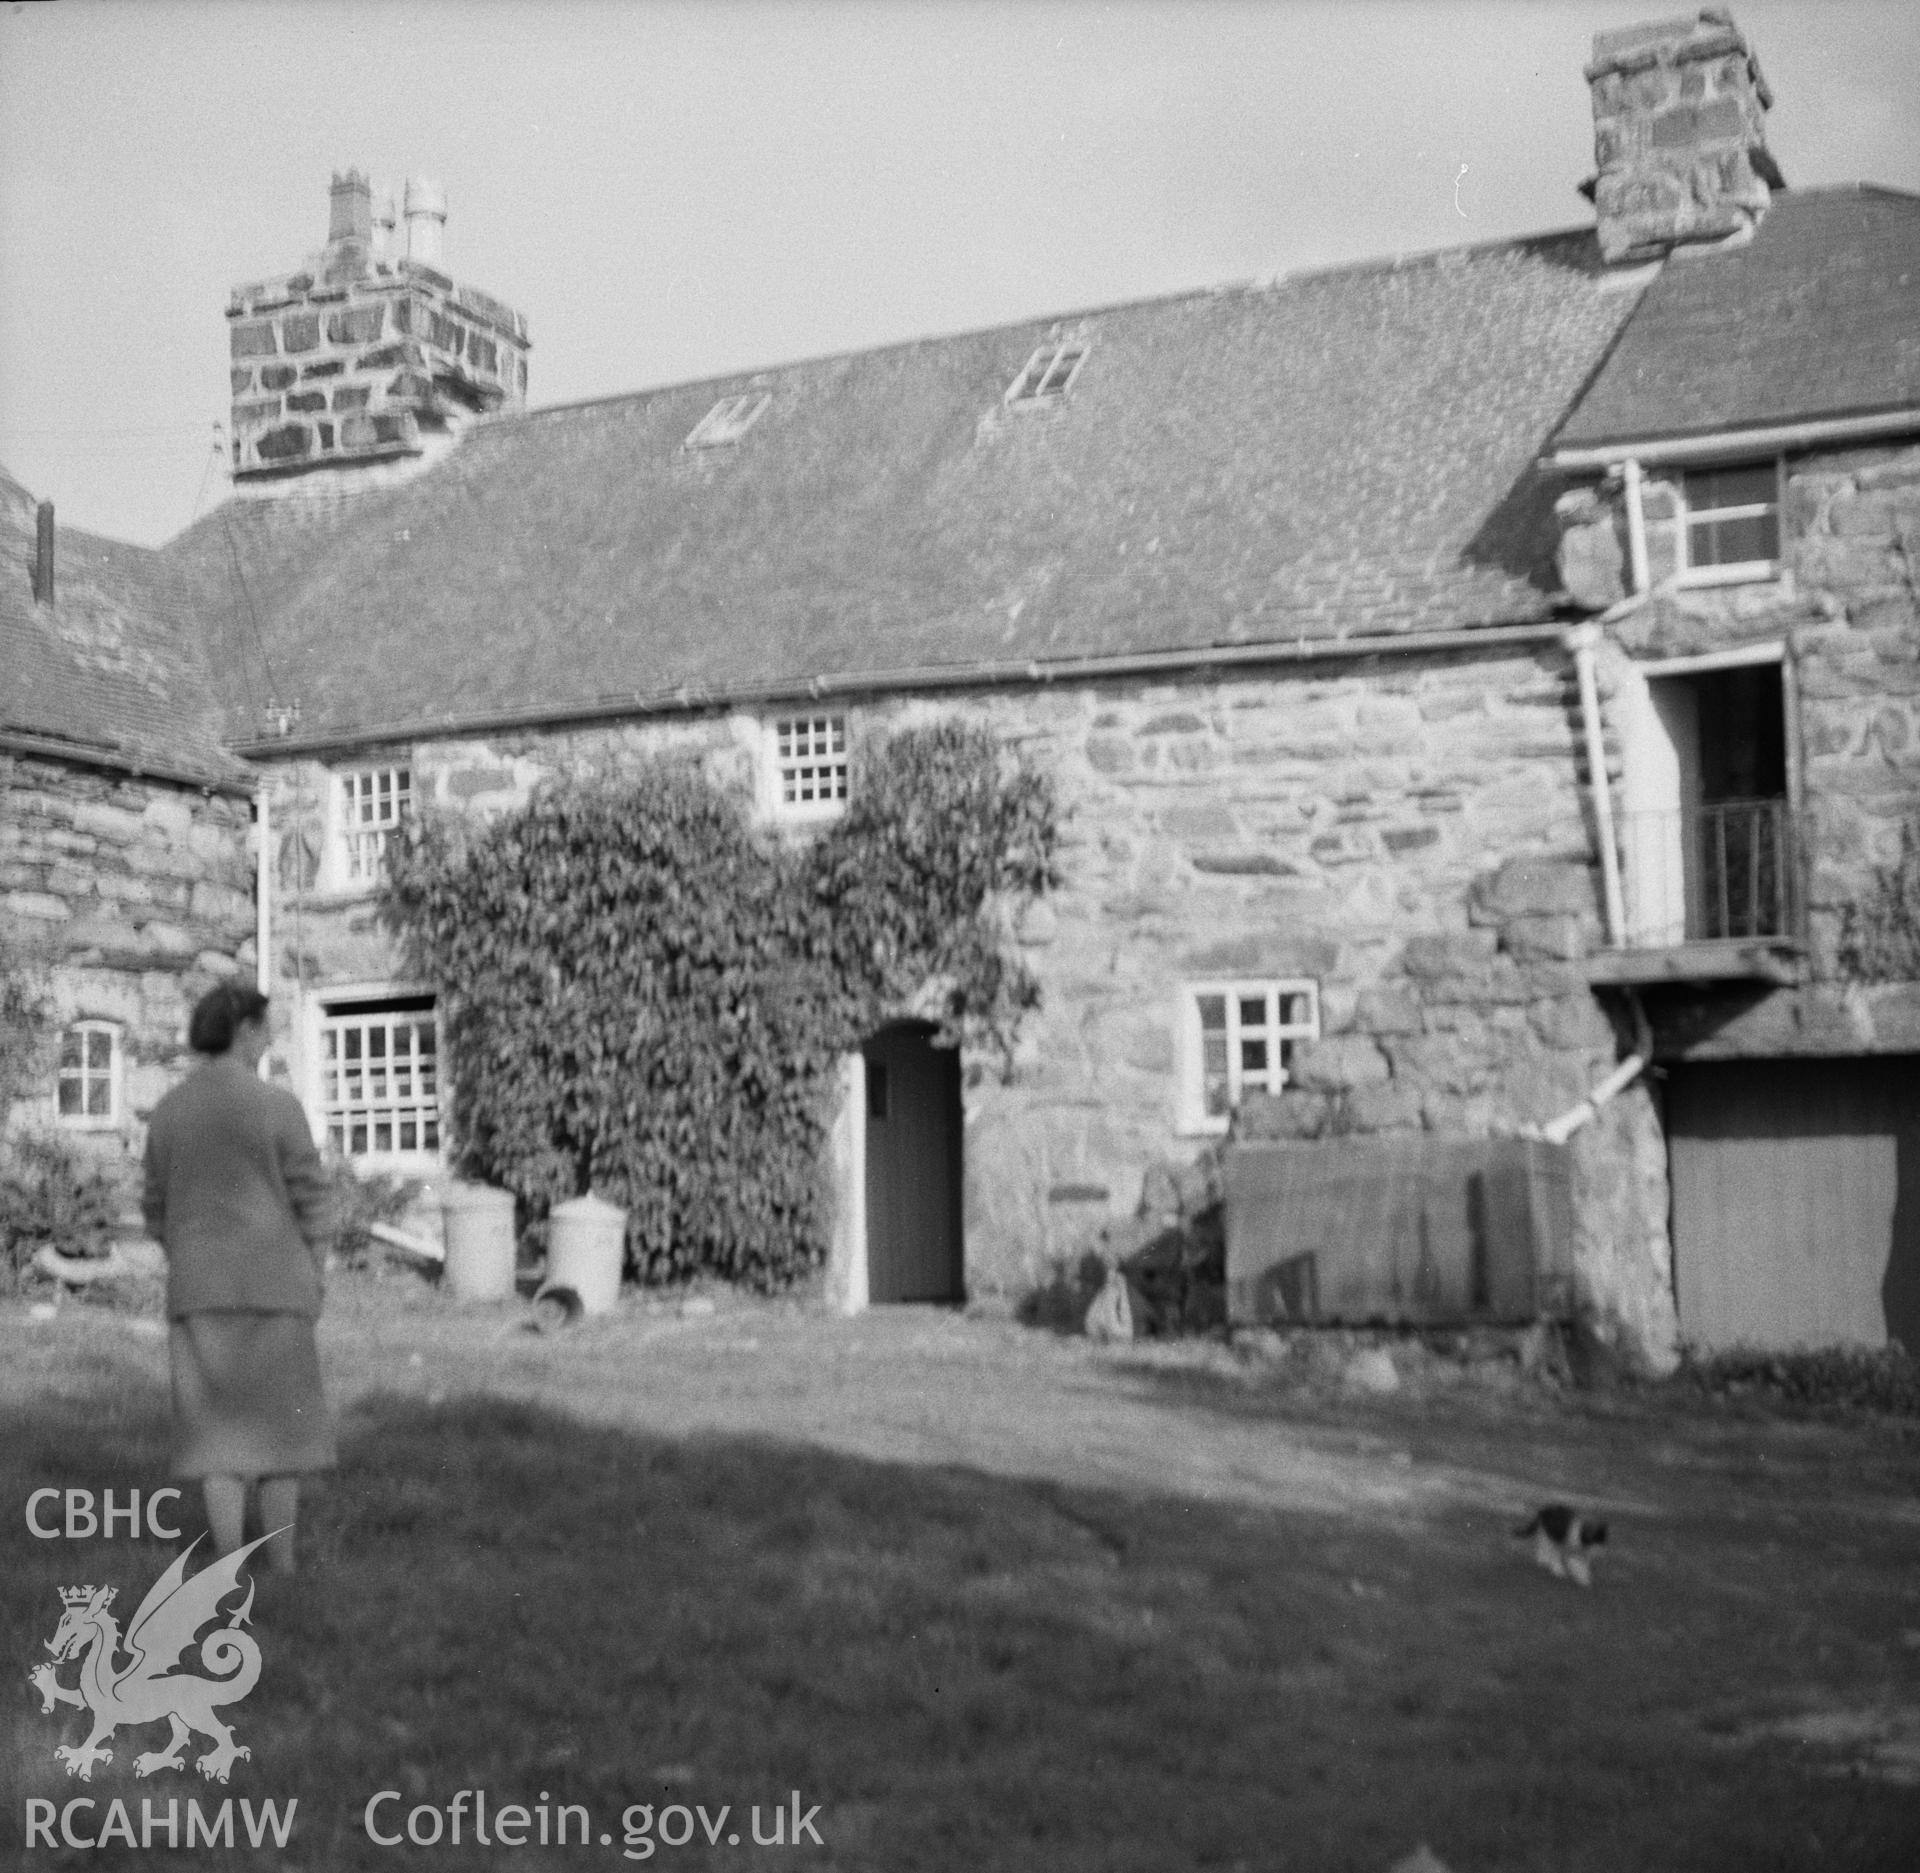 Digital copy of a black and white nitrate negative showing front elevation of Coed Mawr, Merioneth.